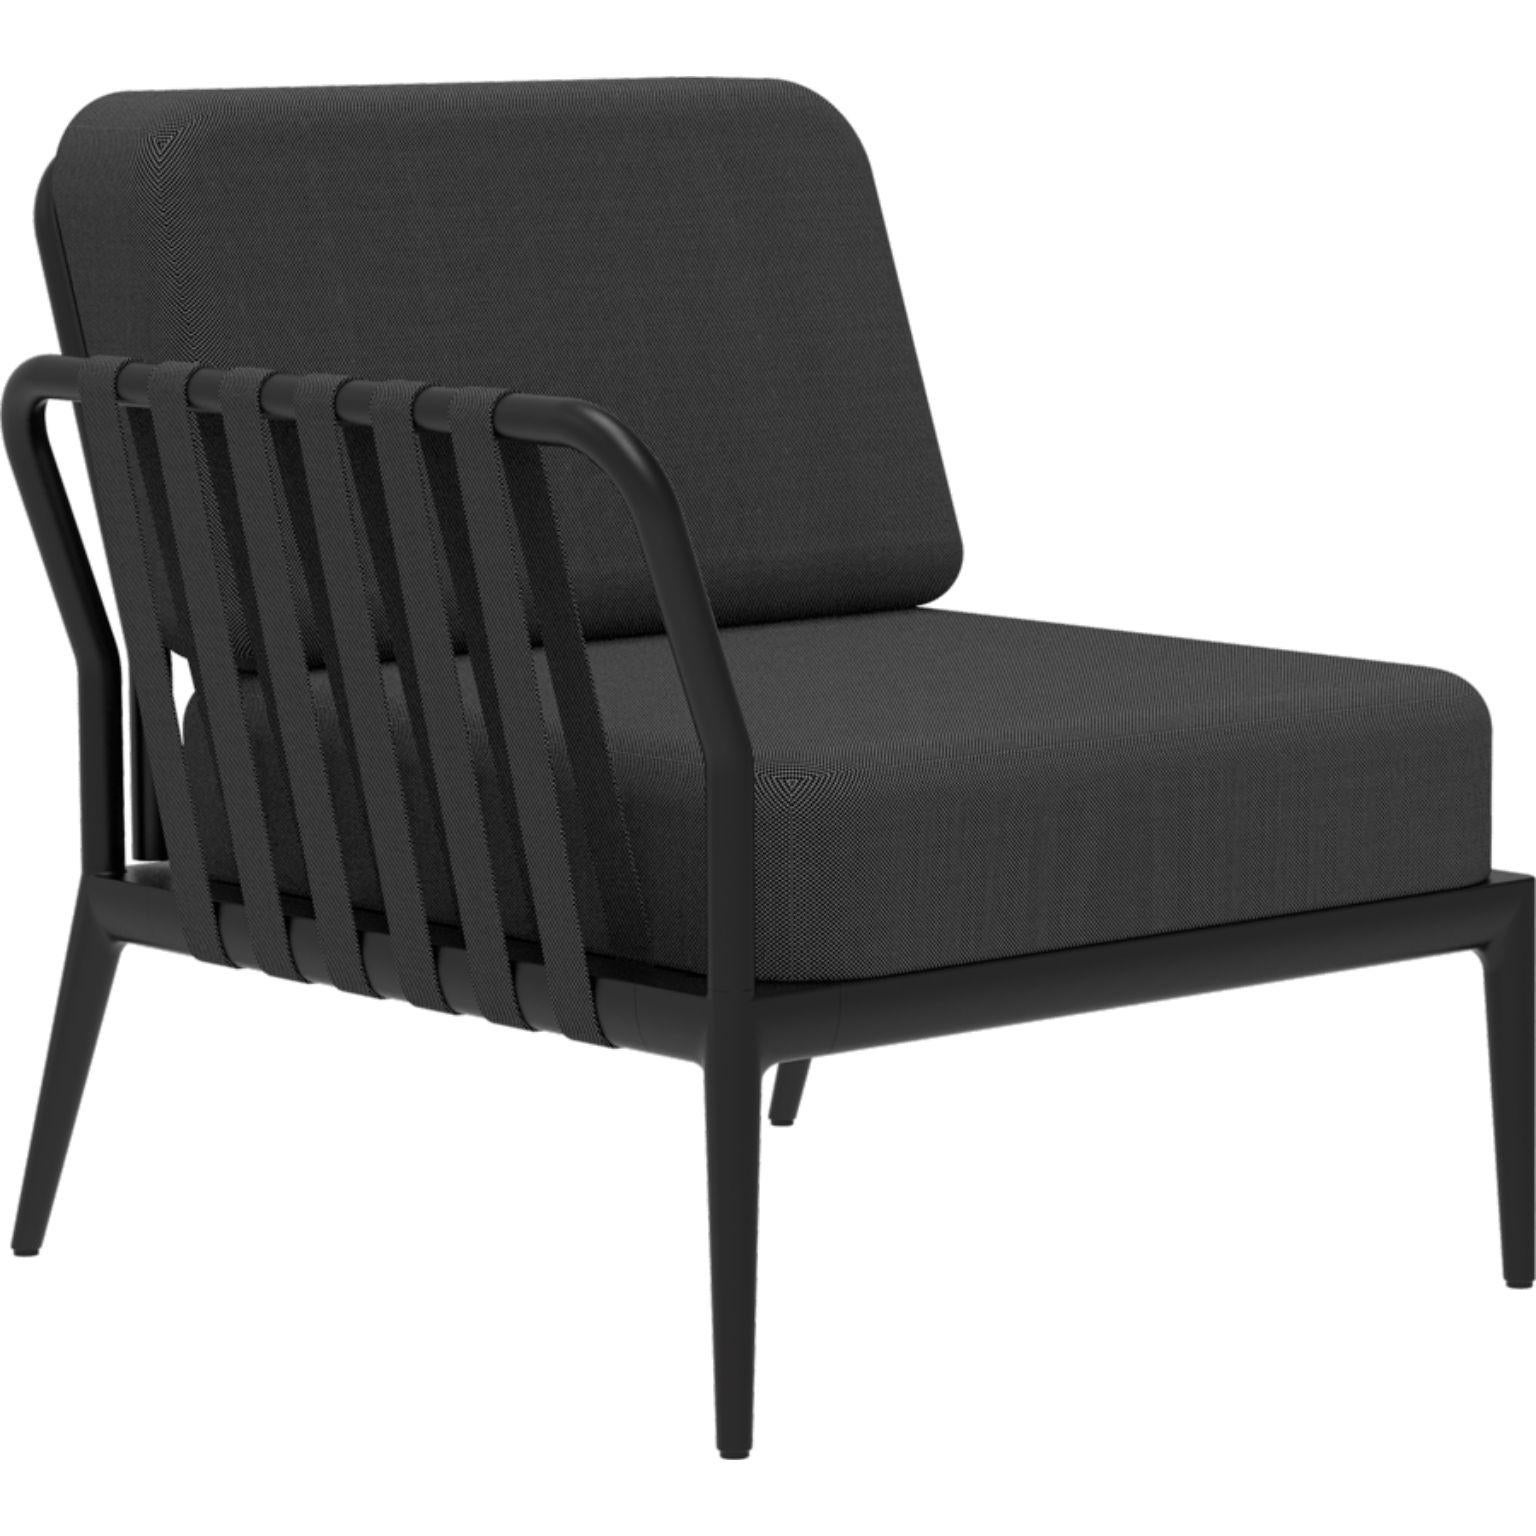 Ribbons black right modular sofa by MOWEE
Dimensions: D83 x W80 x H81 cm (seat height 42 cm)
Material: aluminium and upholstery
Weight: 19 kg
Also available in different colours and finishes.

An unmistakable collection for its beauty and